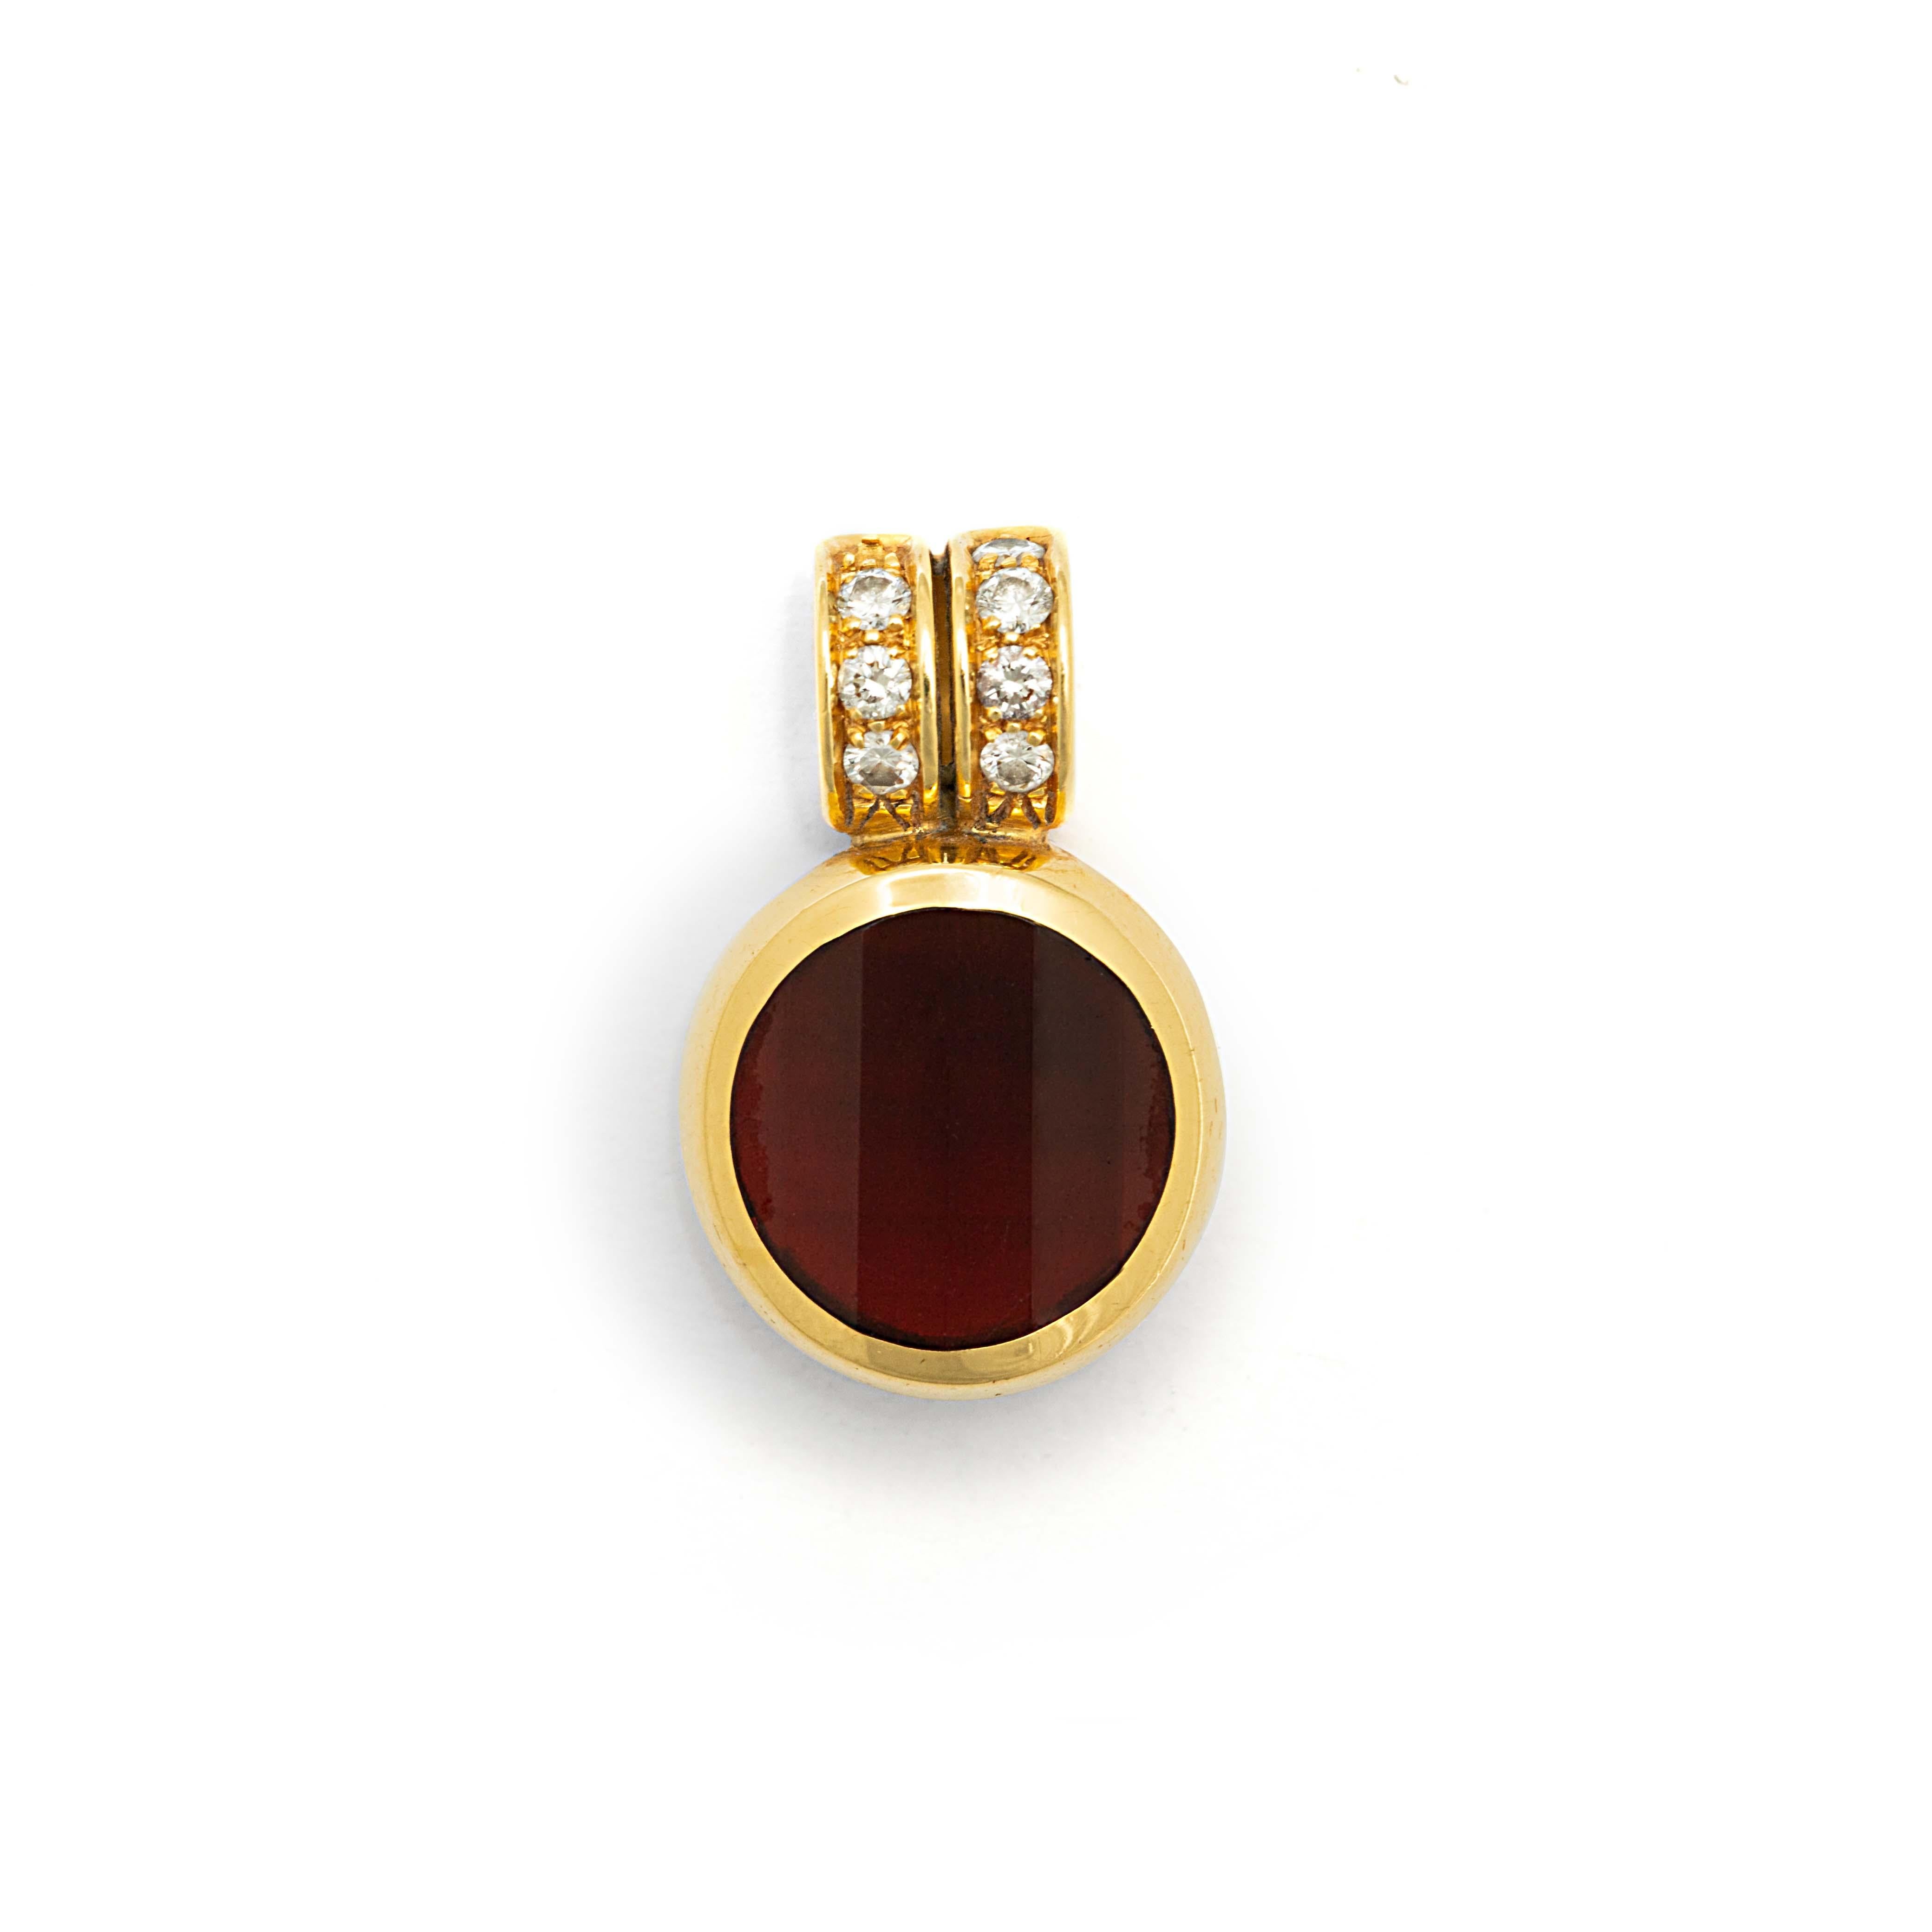 Pomellato. 18K yellow gold 750‰ pendant holding a faceted garnet set with round-cut diamonds. Signed Pomellato.
Wear consistent with age and use, chips. Height: 2.10 cm. Gross weight: 8.77 g.